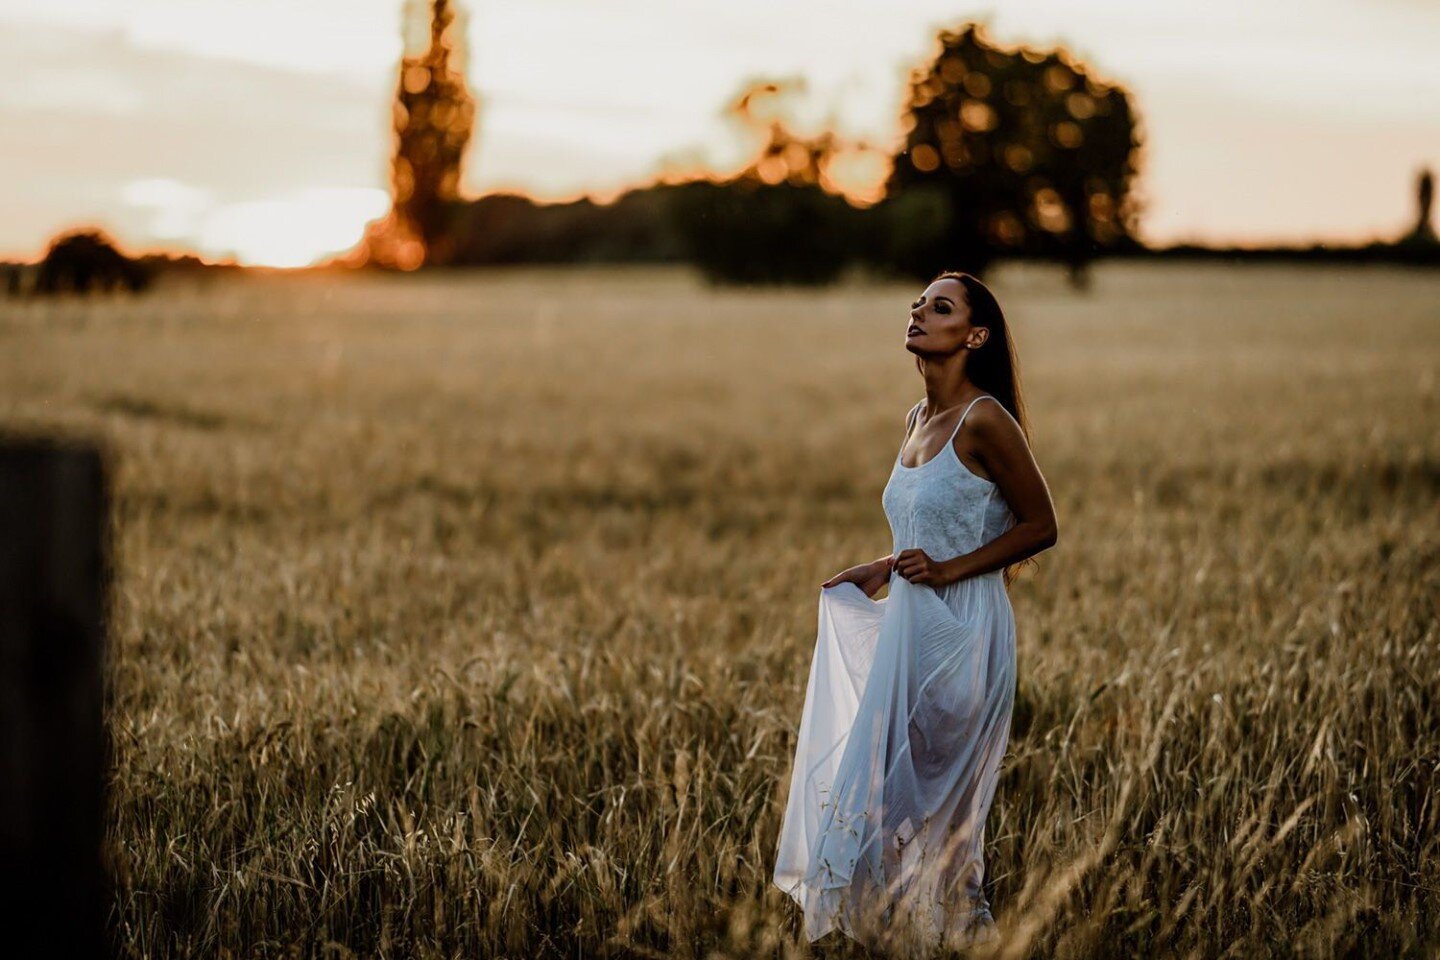 Looking forward to long Summer evenings and sunset shoots! ⁣
With Monika⁣
⁣
________⁣
#naturallight #naturallightphotography #sunsetshoot #naturallightphotographer #portraitcollective